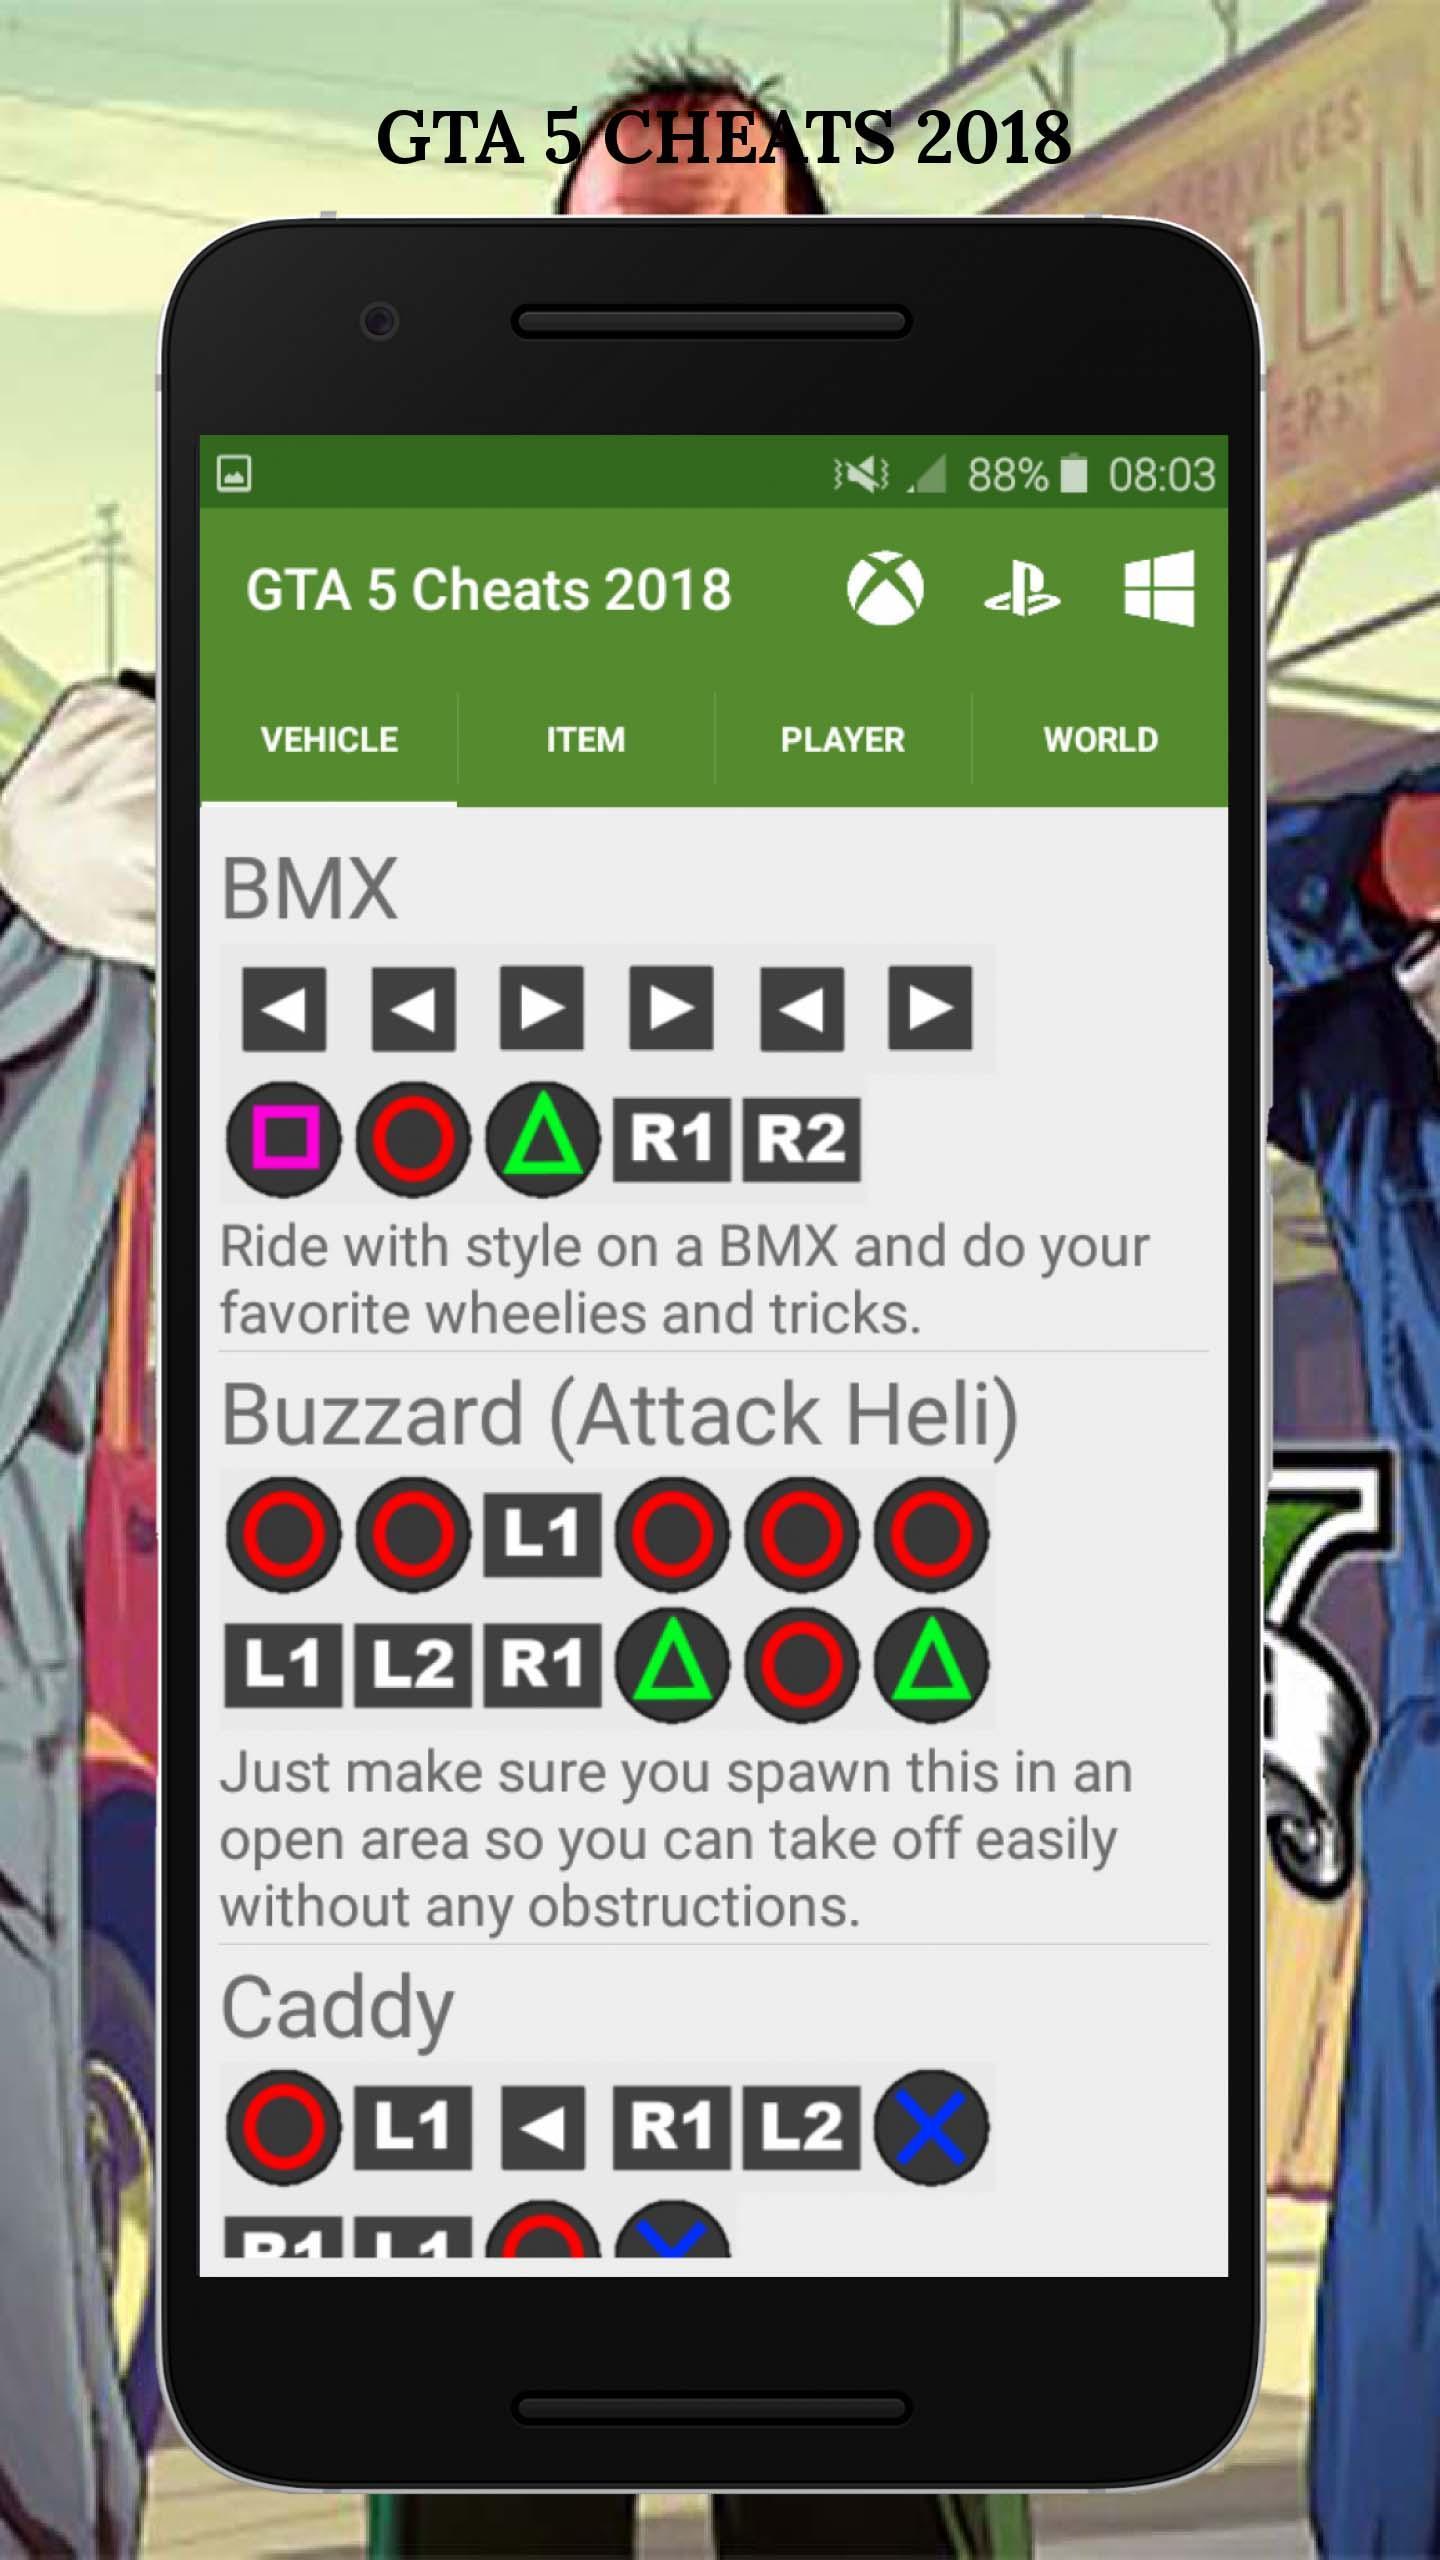 Gta 5 Cheats 2018 For Android Apk Download - roblox money hacks 2018